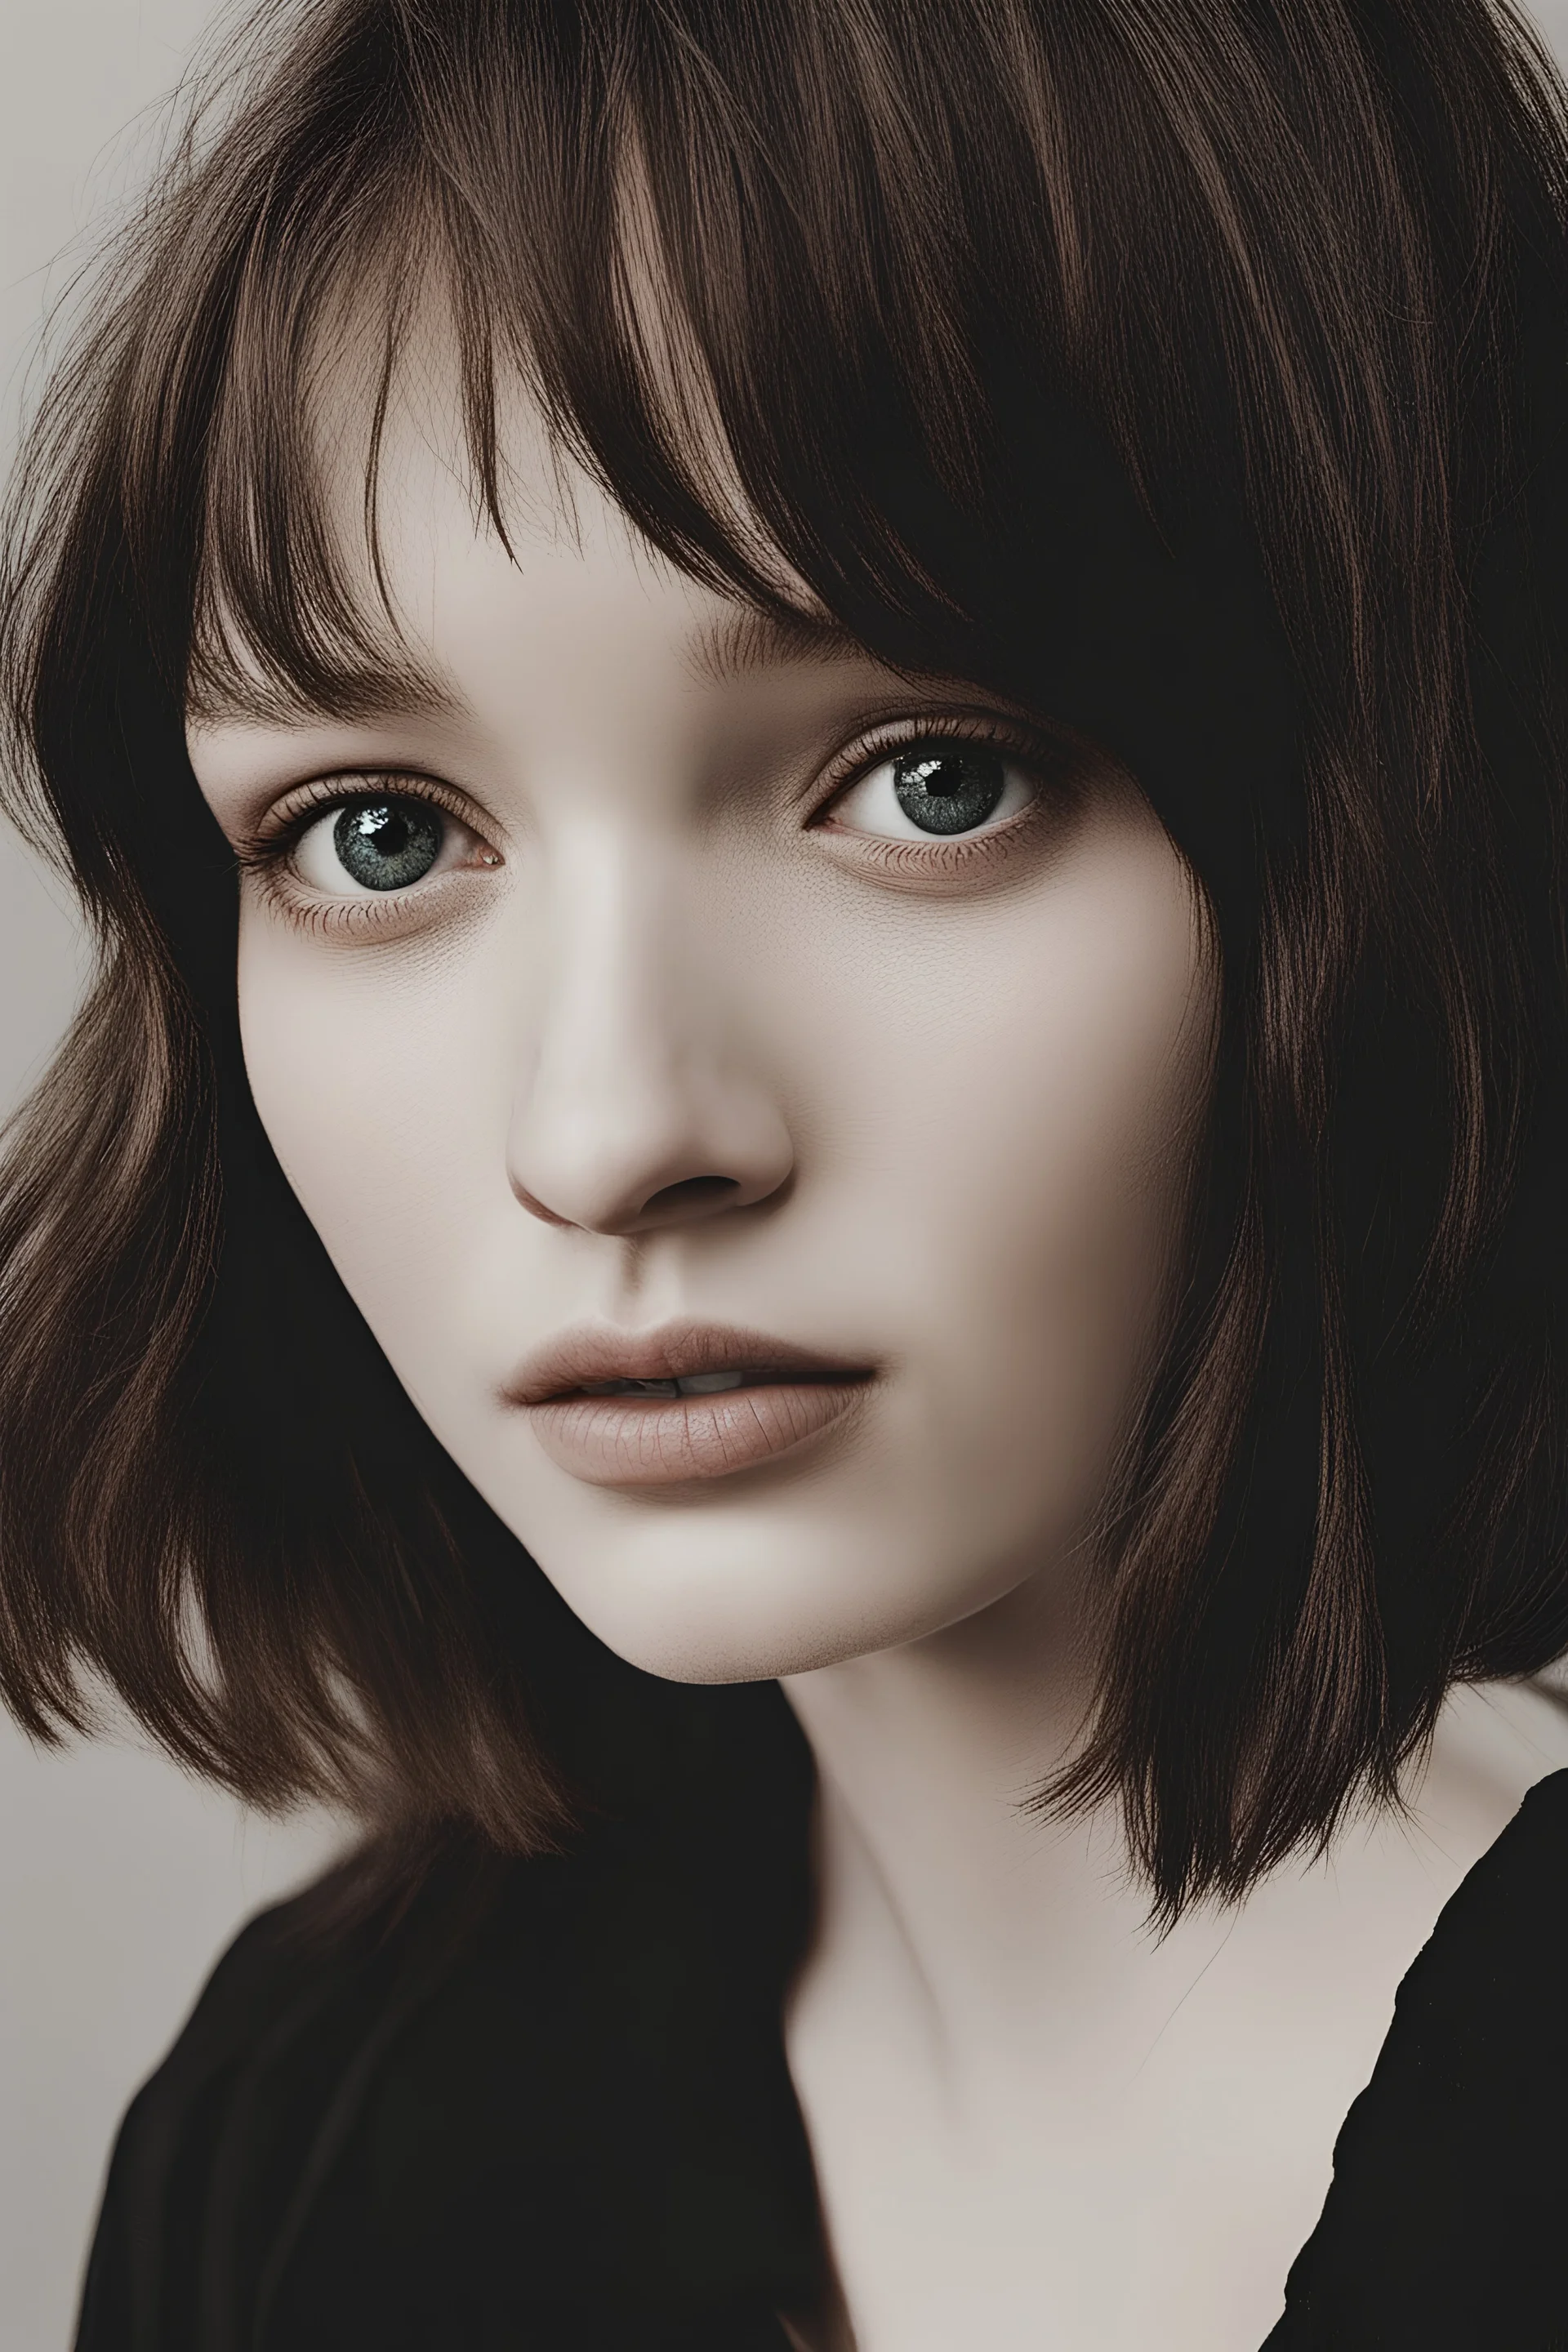 A selfie of a brunette woman with a round face, short hair, and narrow eyes who resembles Emily Browning